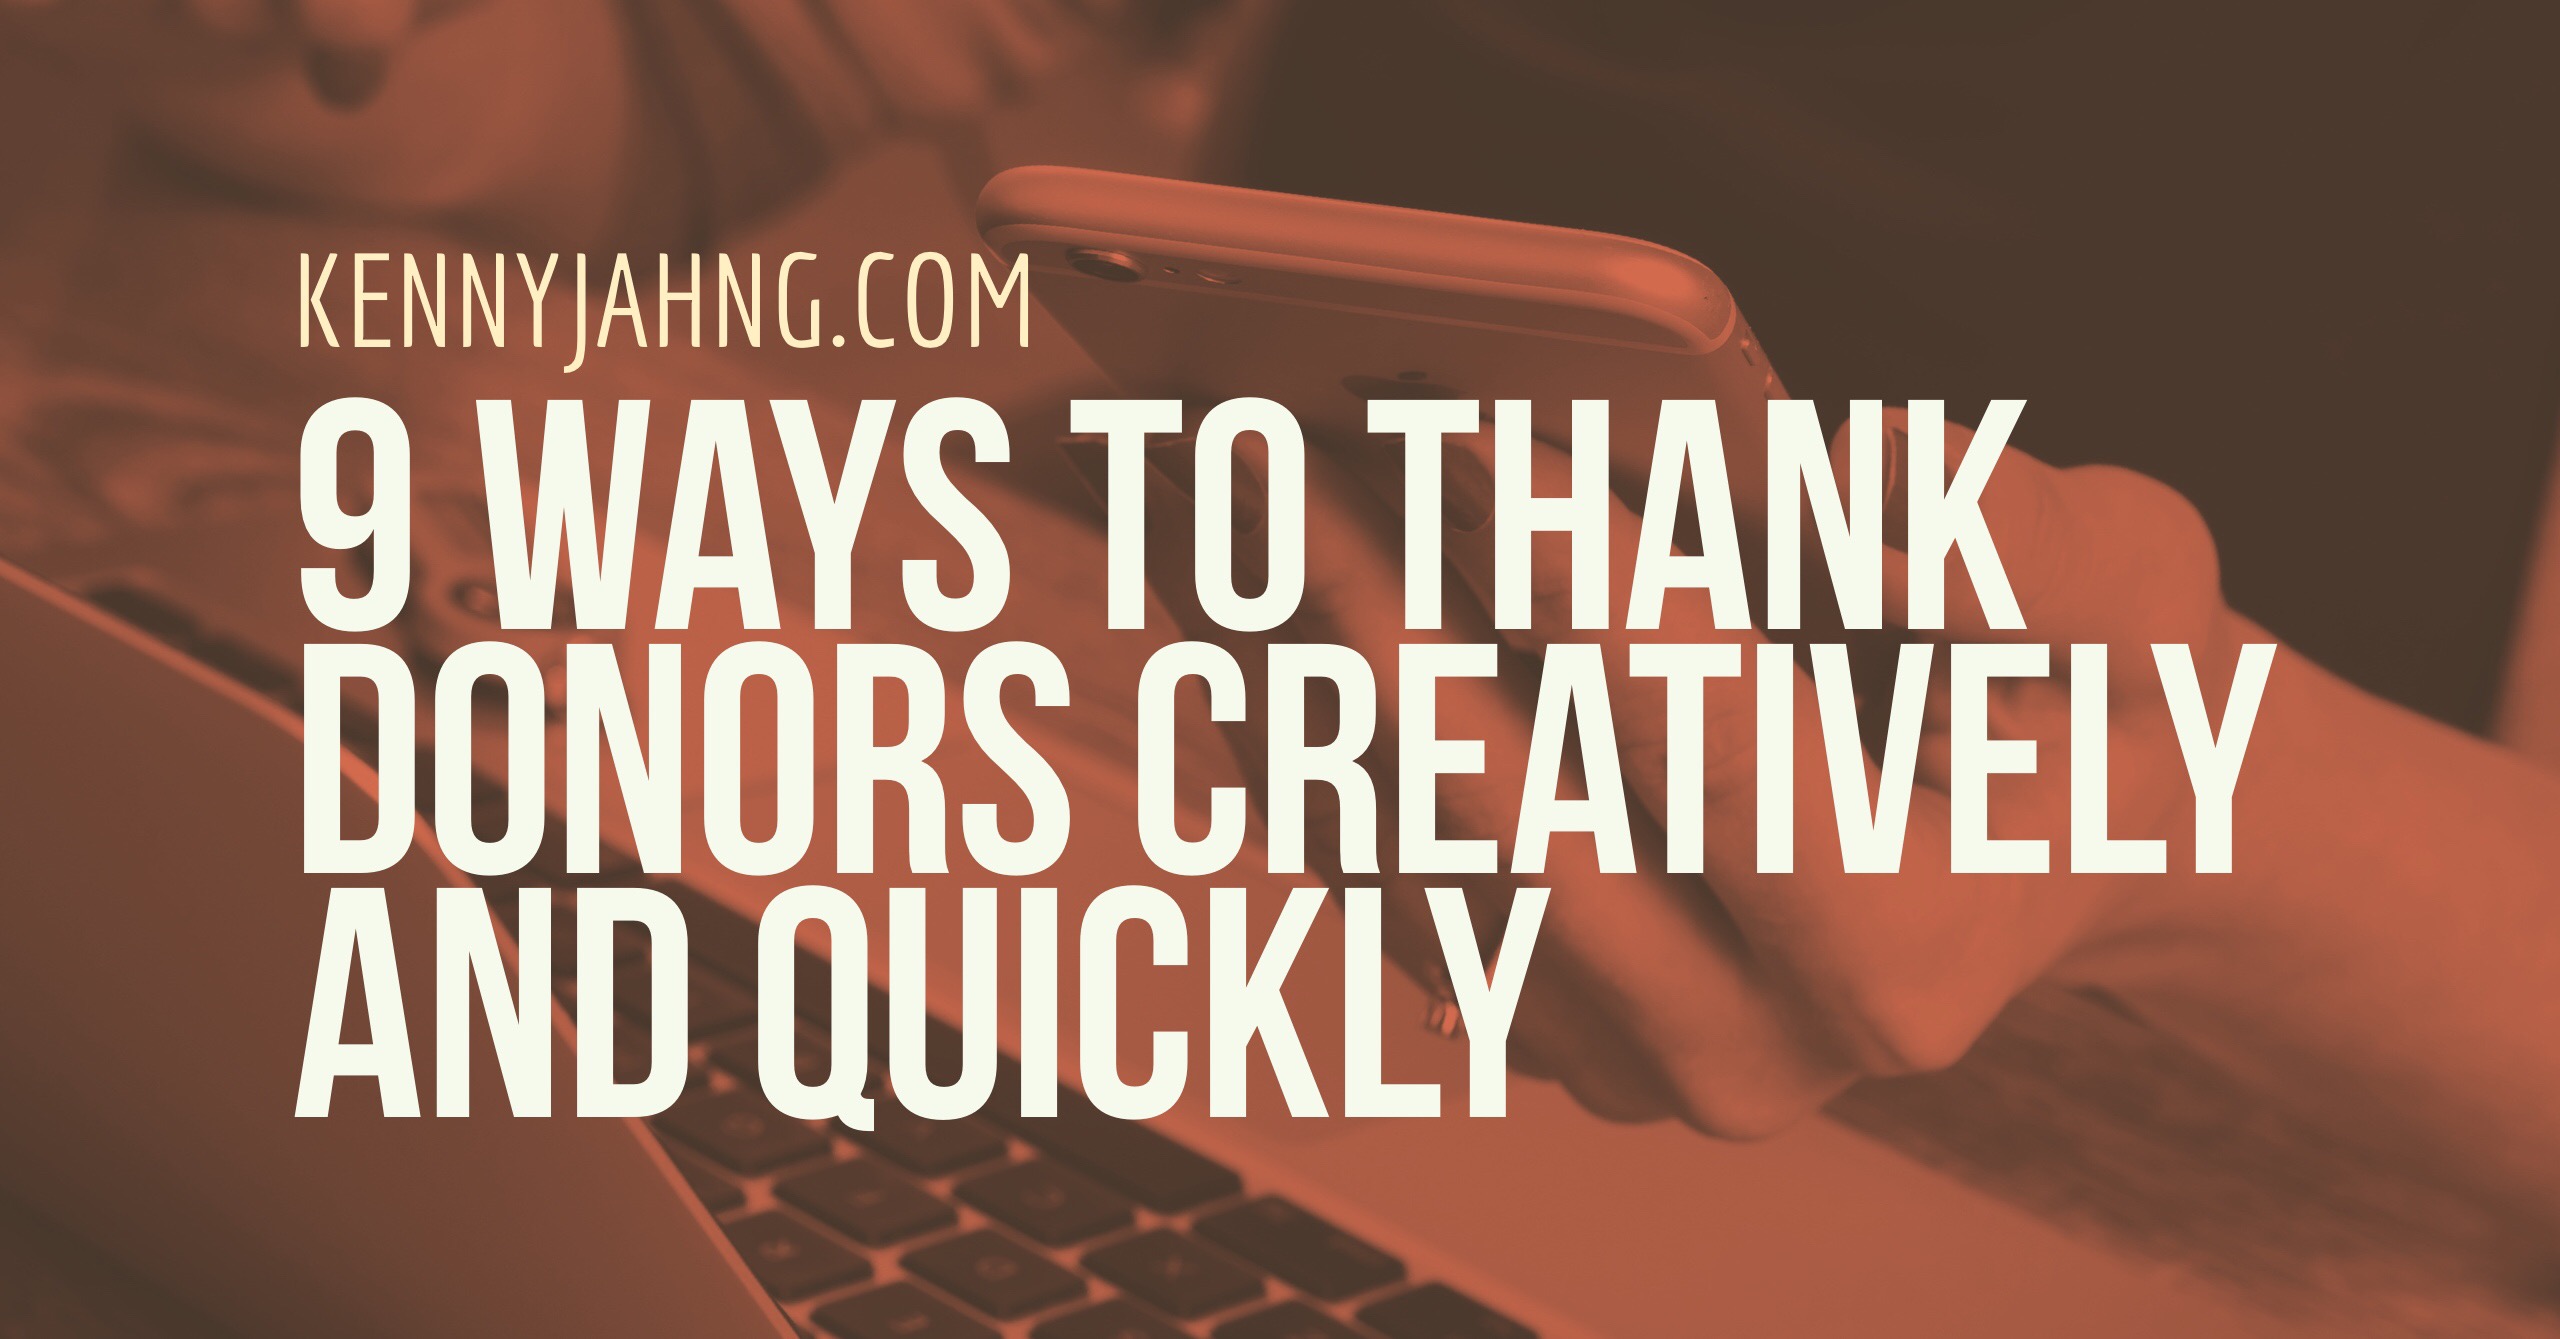 9 ways to thank donors